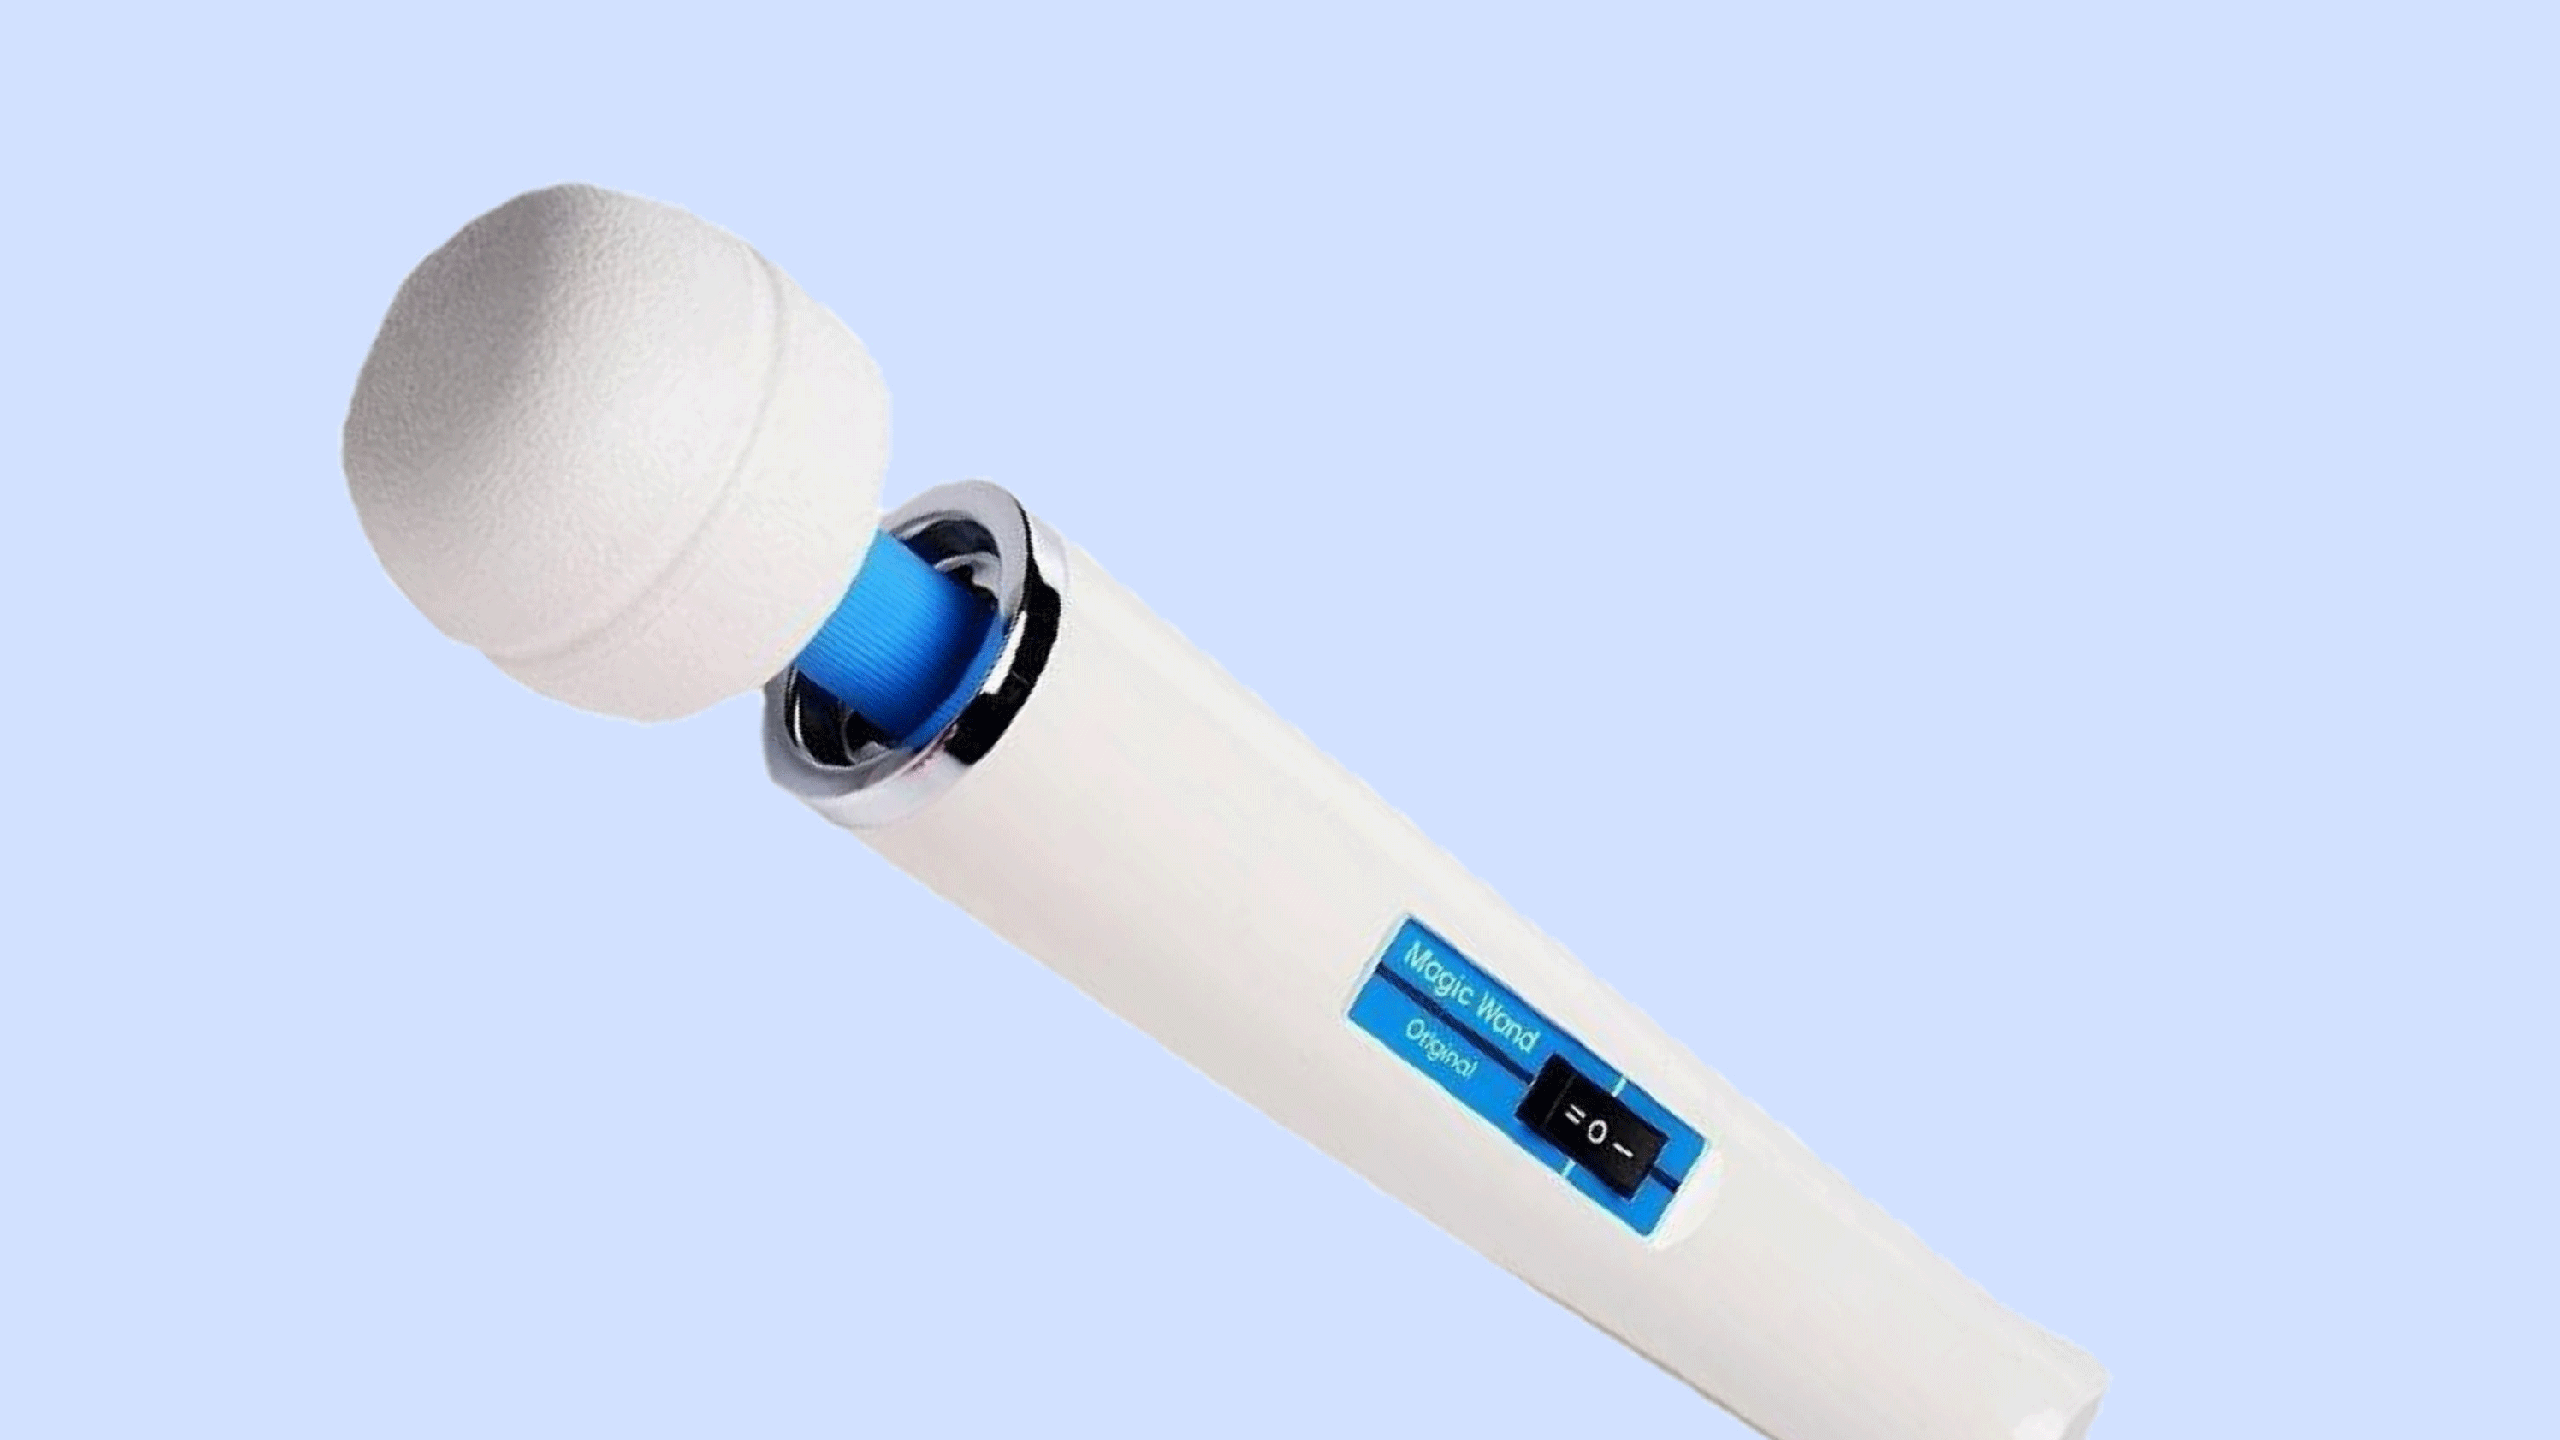 Einstein reccomend trying magic wand attachment